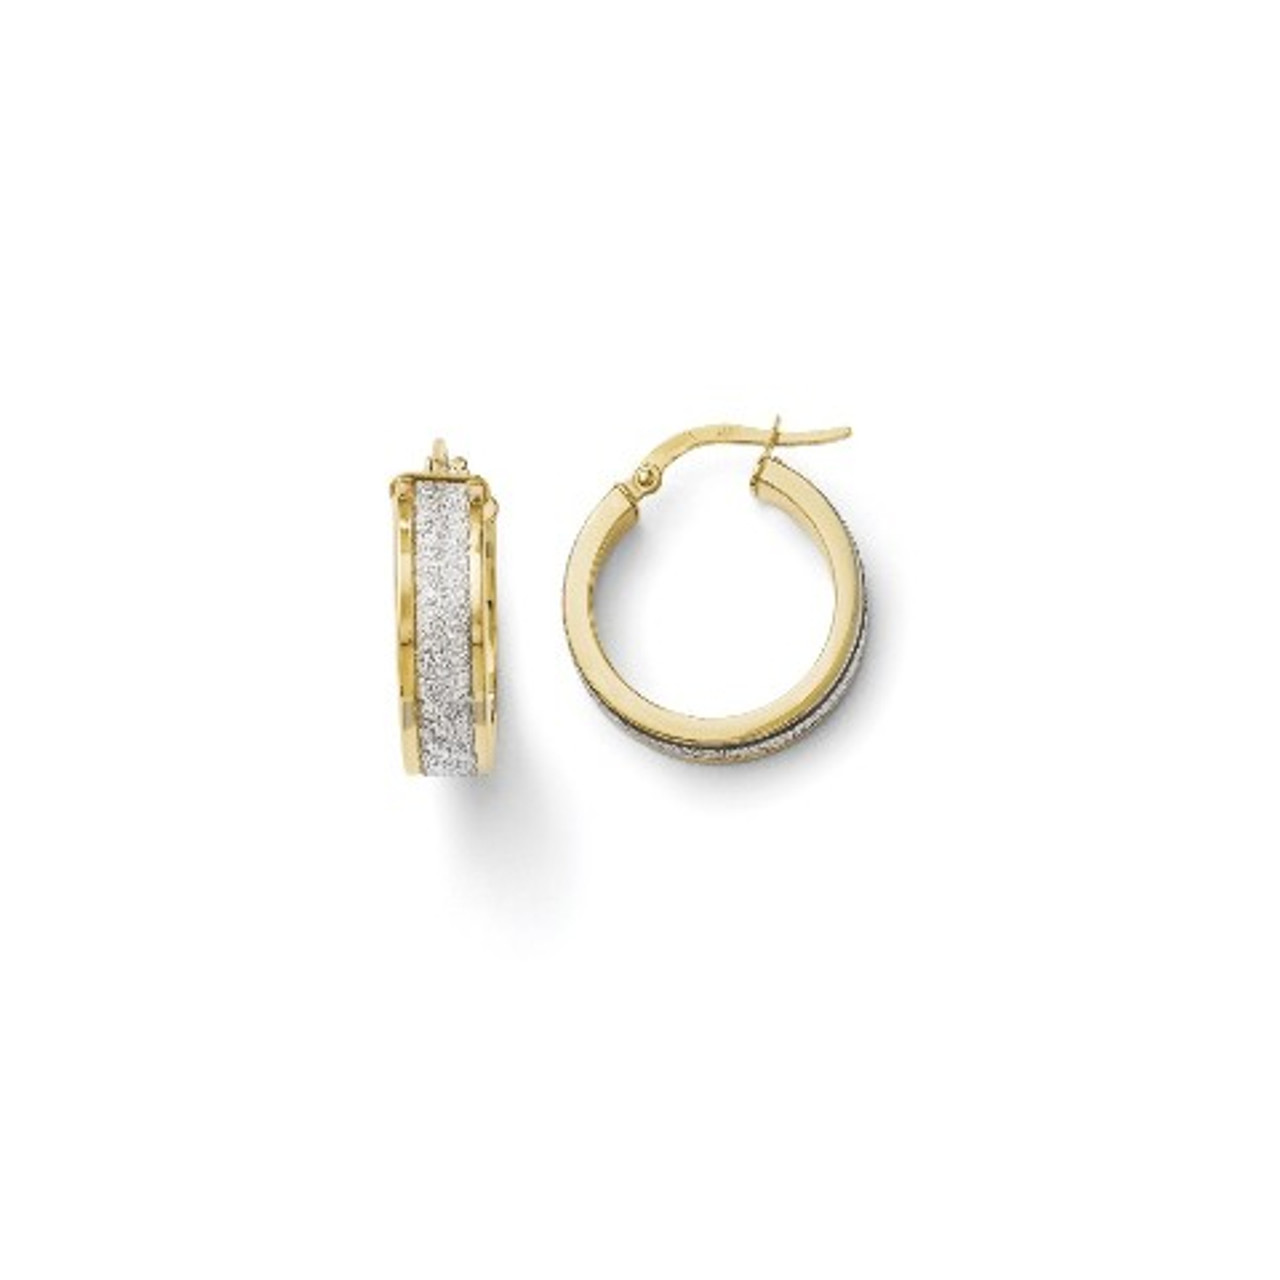 Discover more than 261 fancy gold hoop earrings